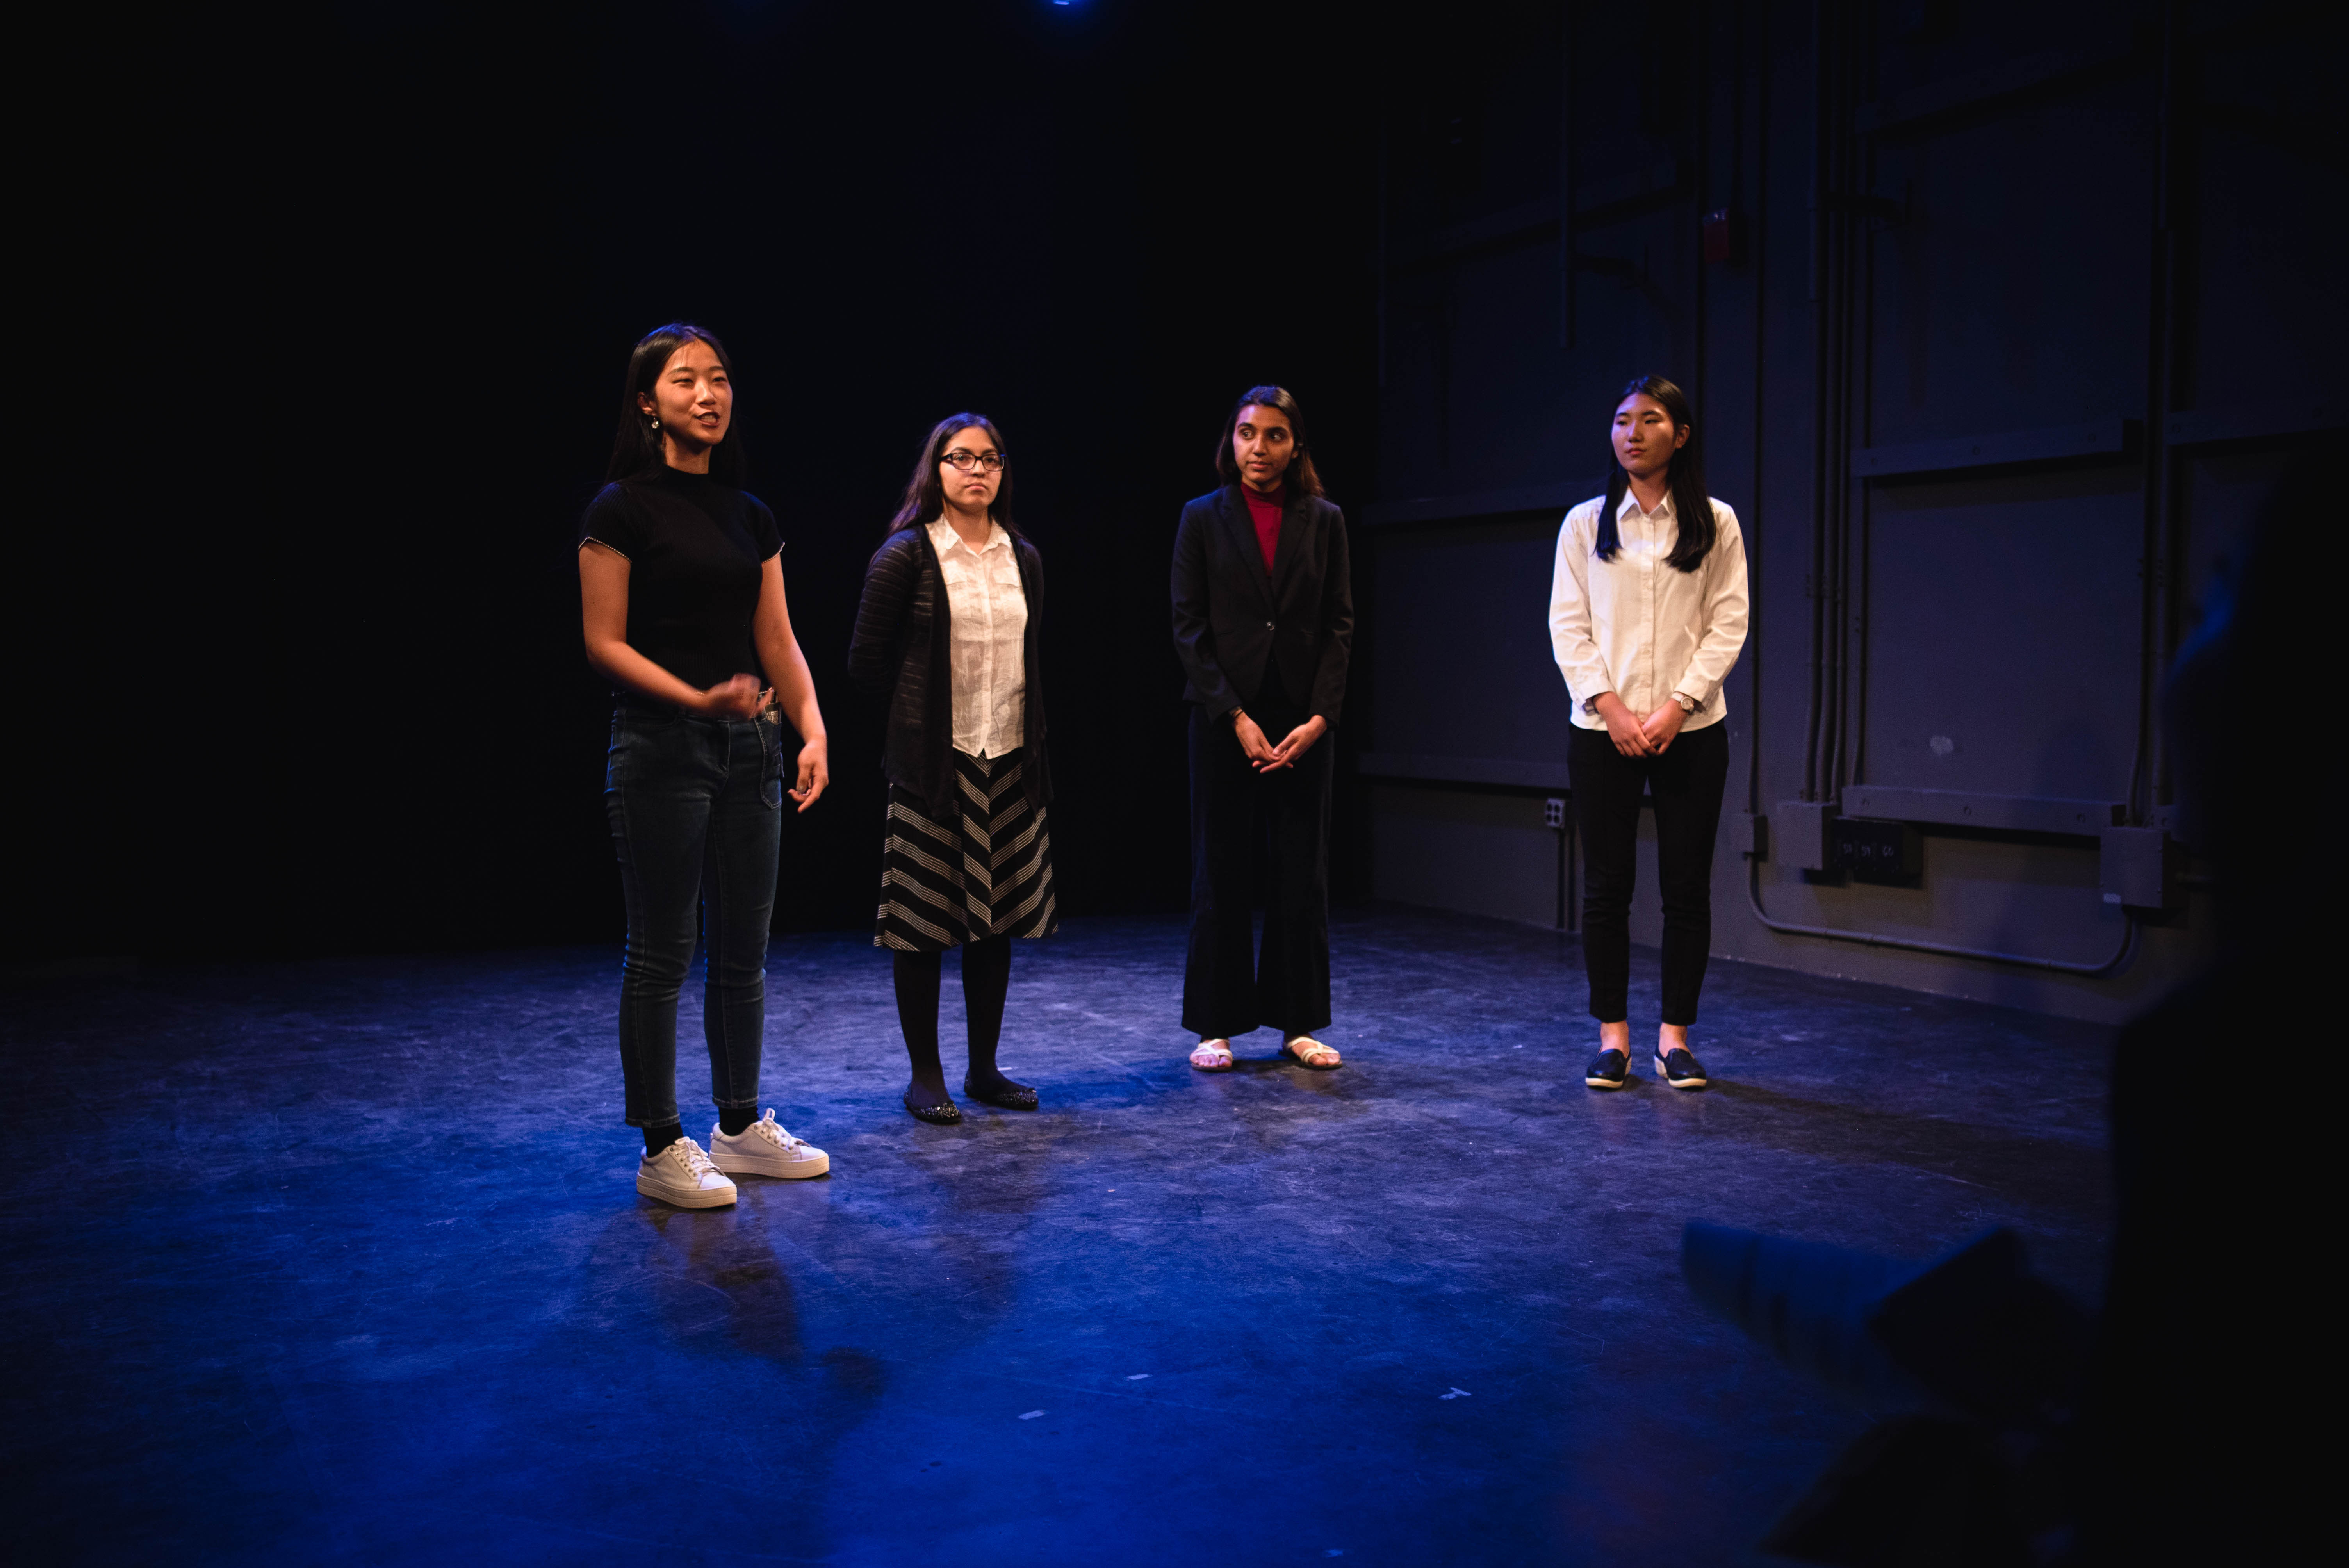 Four students present onstage